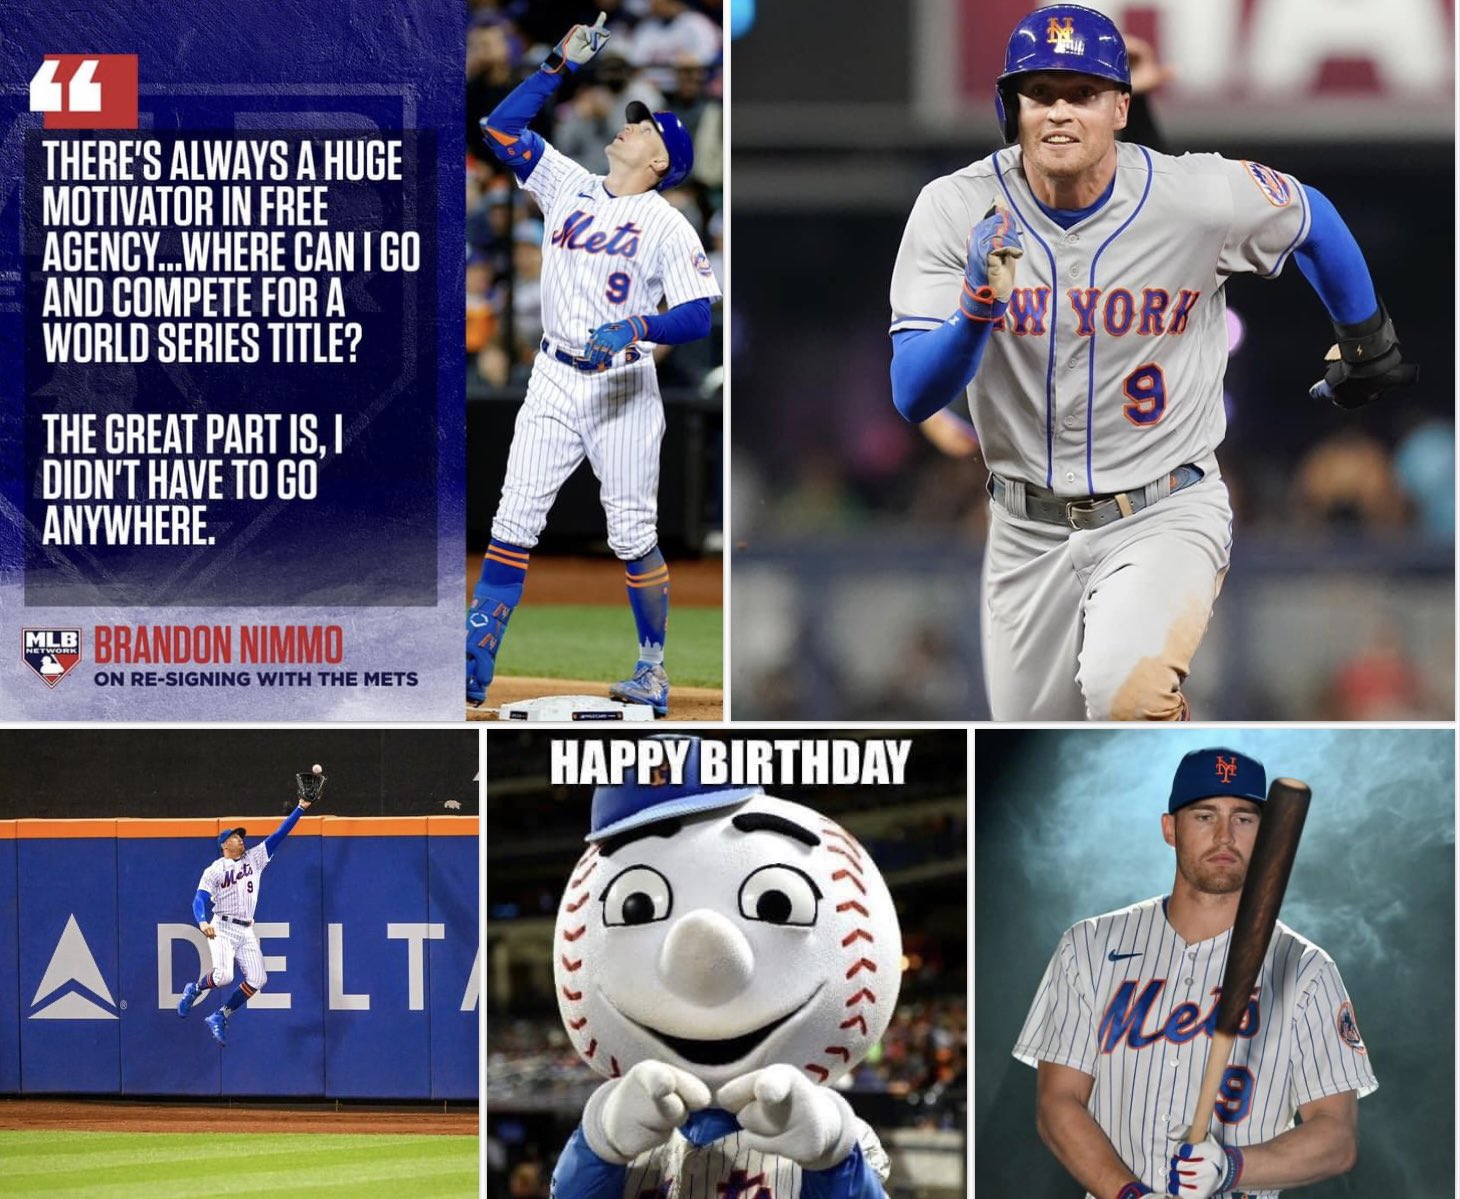    March 26th a very Happy 30th birthday to Met-for-life, Brandon Nimmo! 